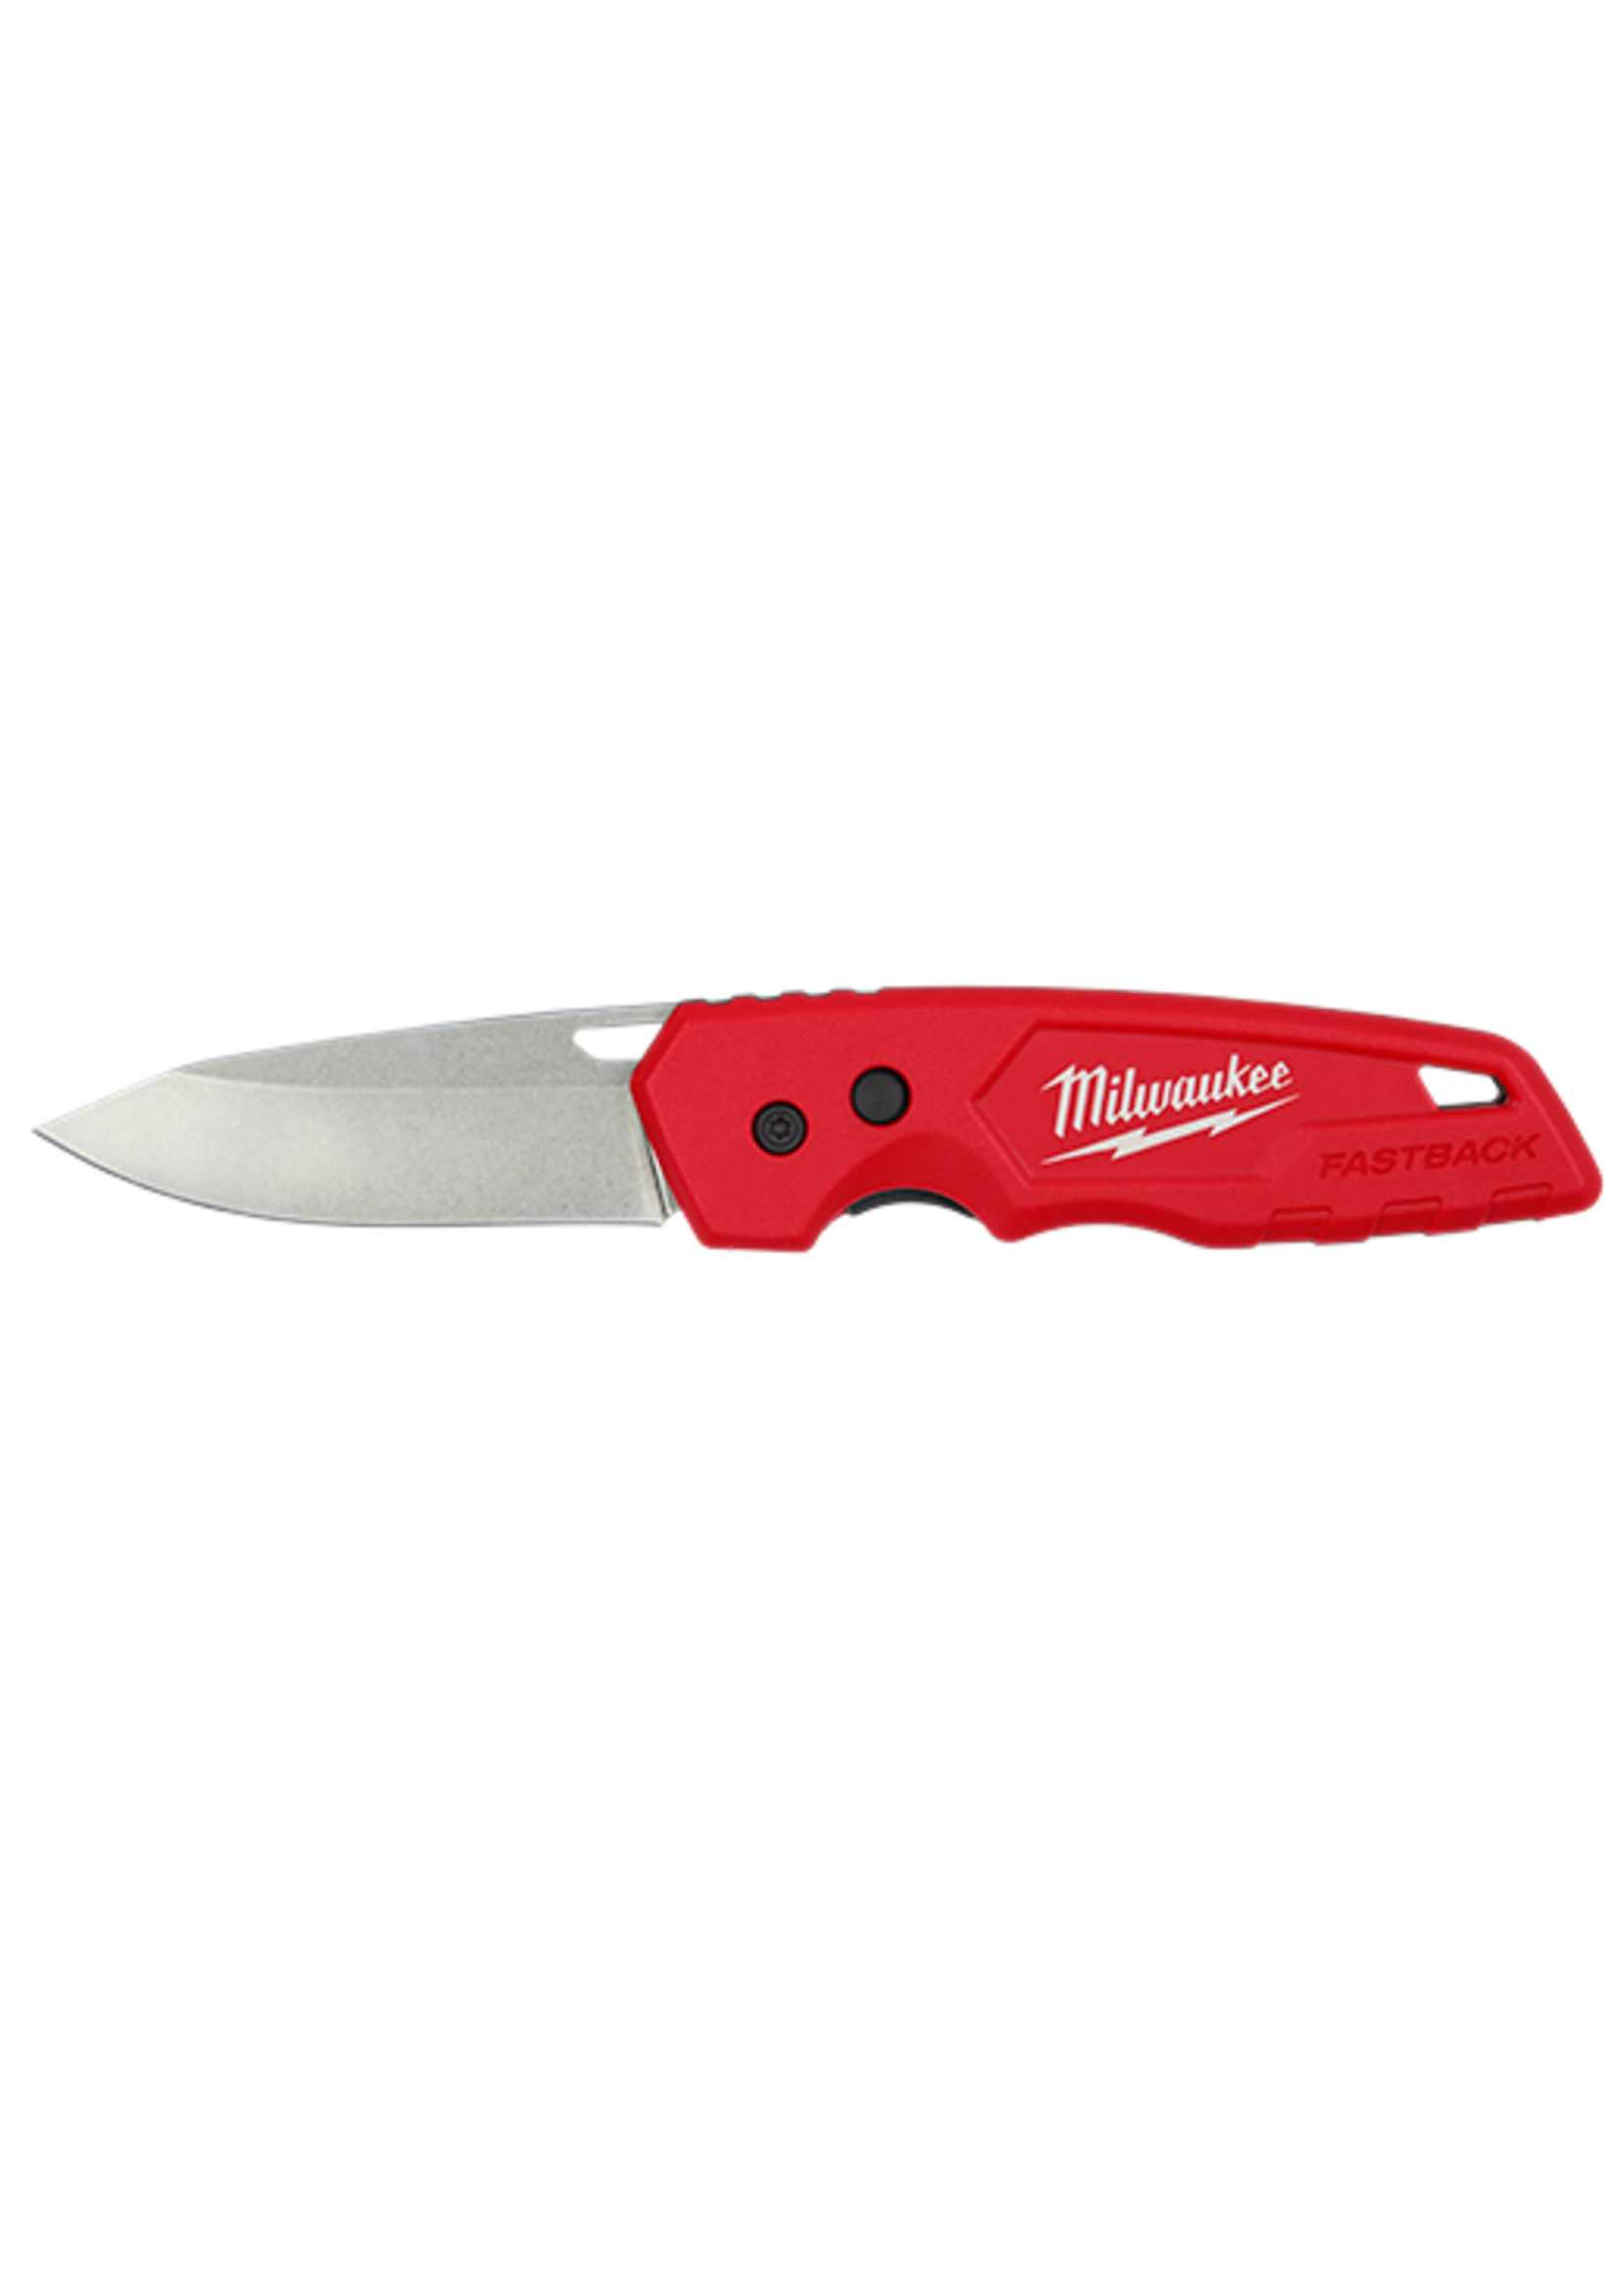 MILWAUKEE FASTBACK Stainless Steel Folding Knife with 2.95 in. Blade - 48-22-1520